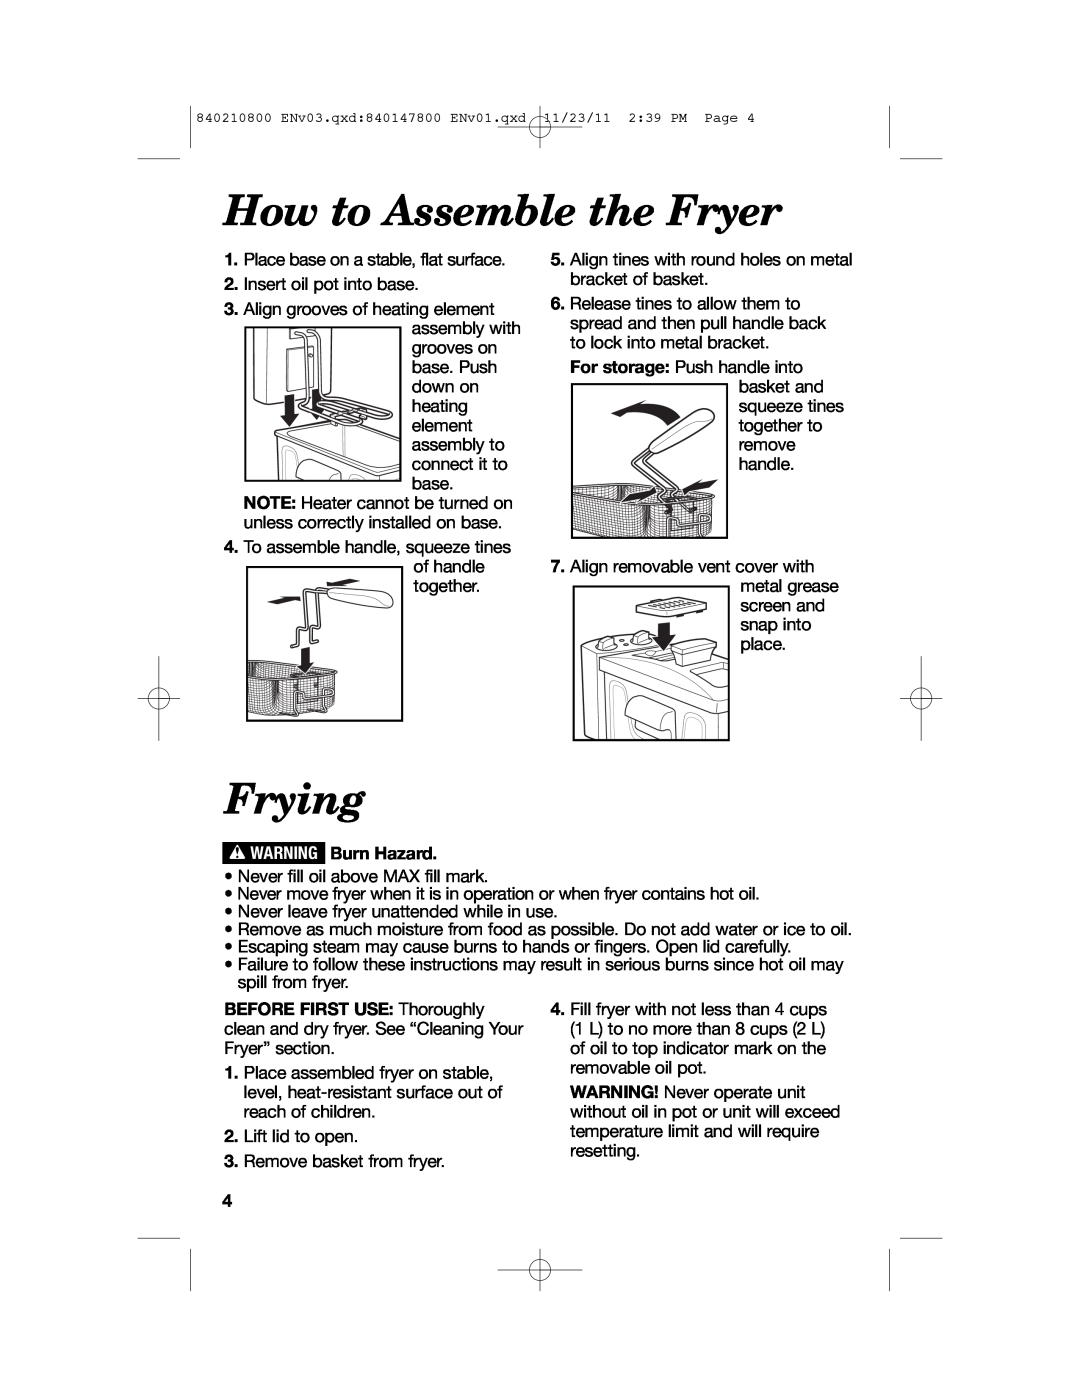 Hamilton Beach 35200 manual How to Assemble the Fryer, Frying, w WARNING Burn Hazard, BEFORE FIRST USE Thoroughly 